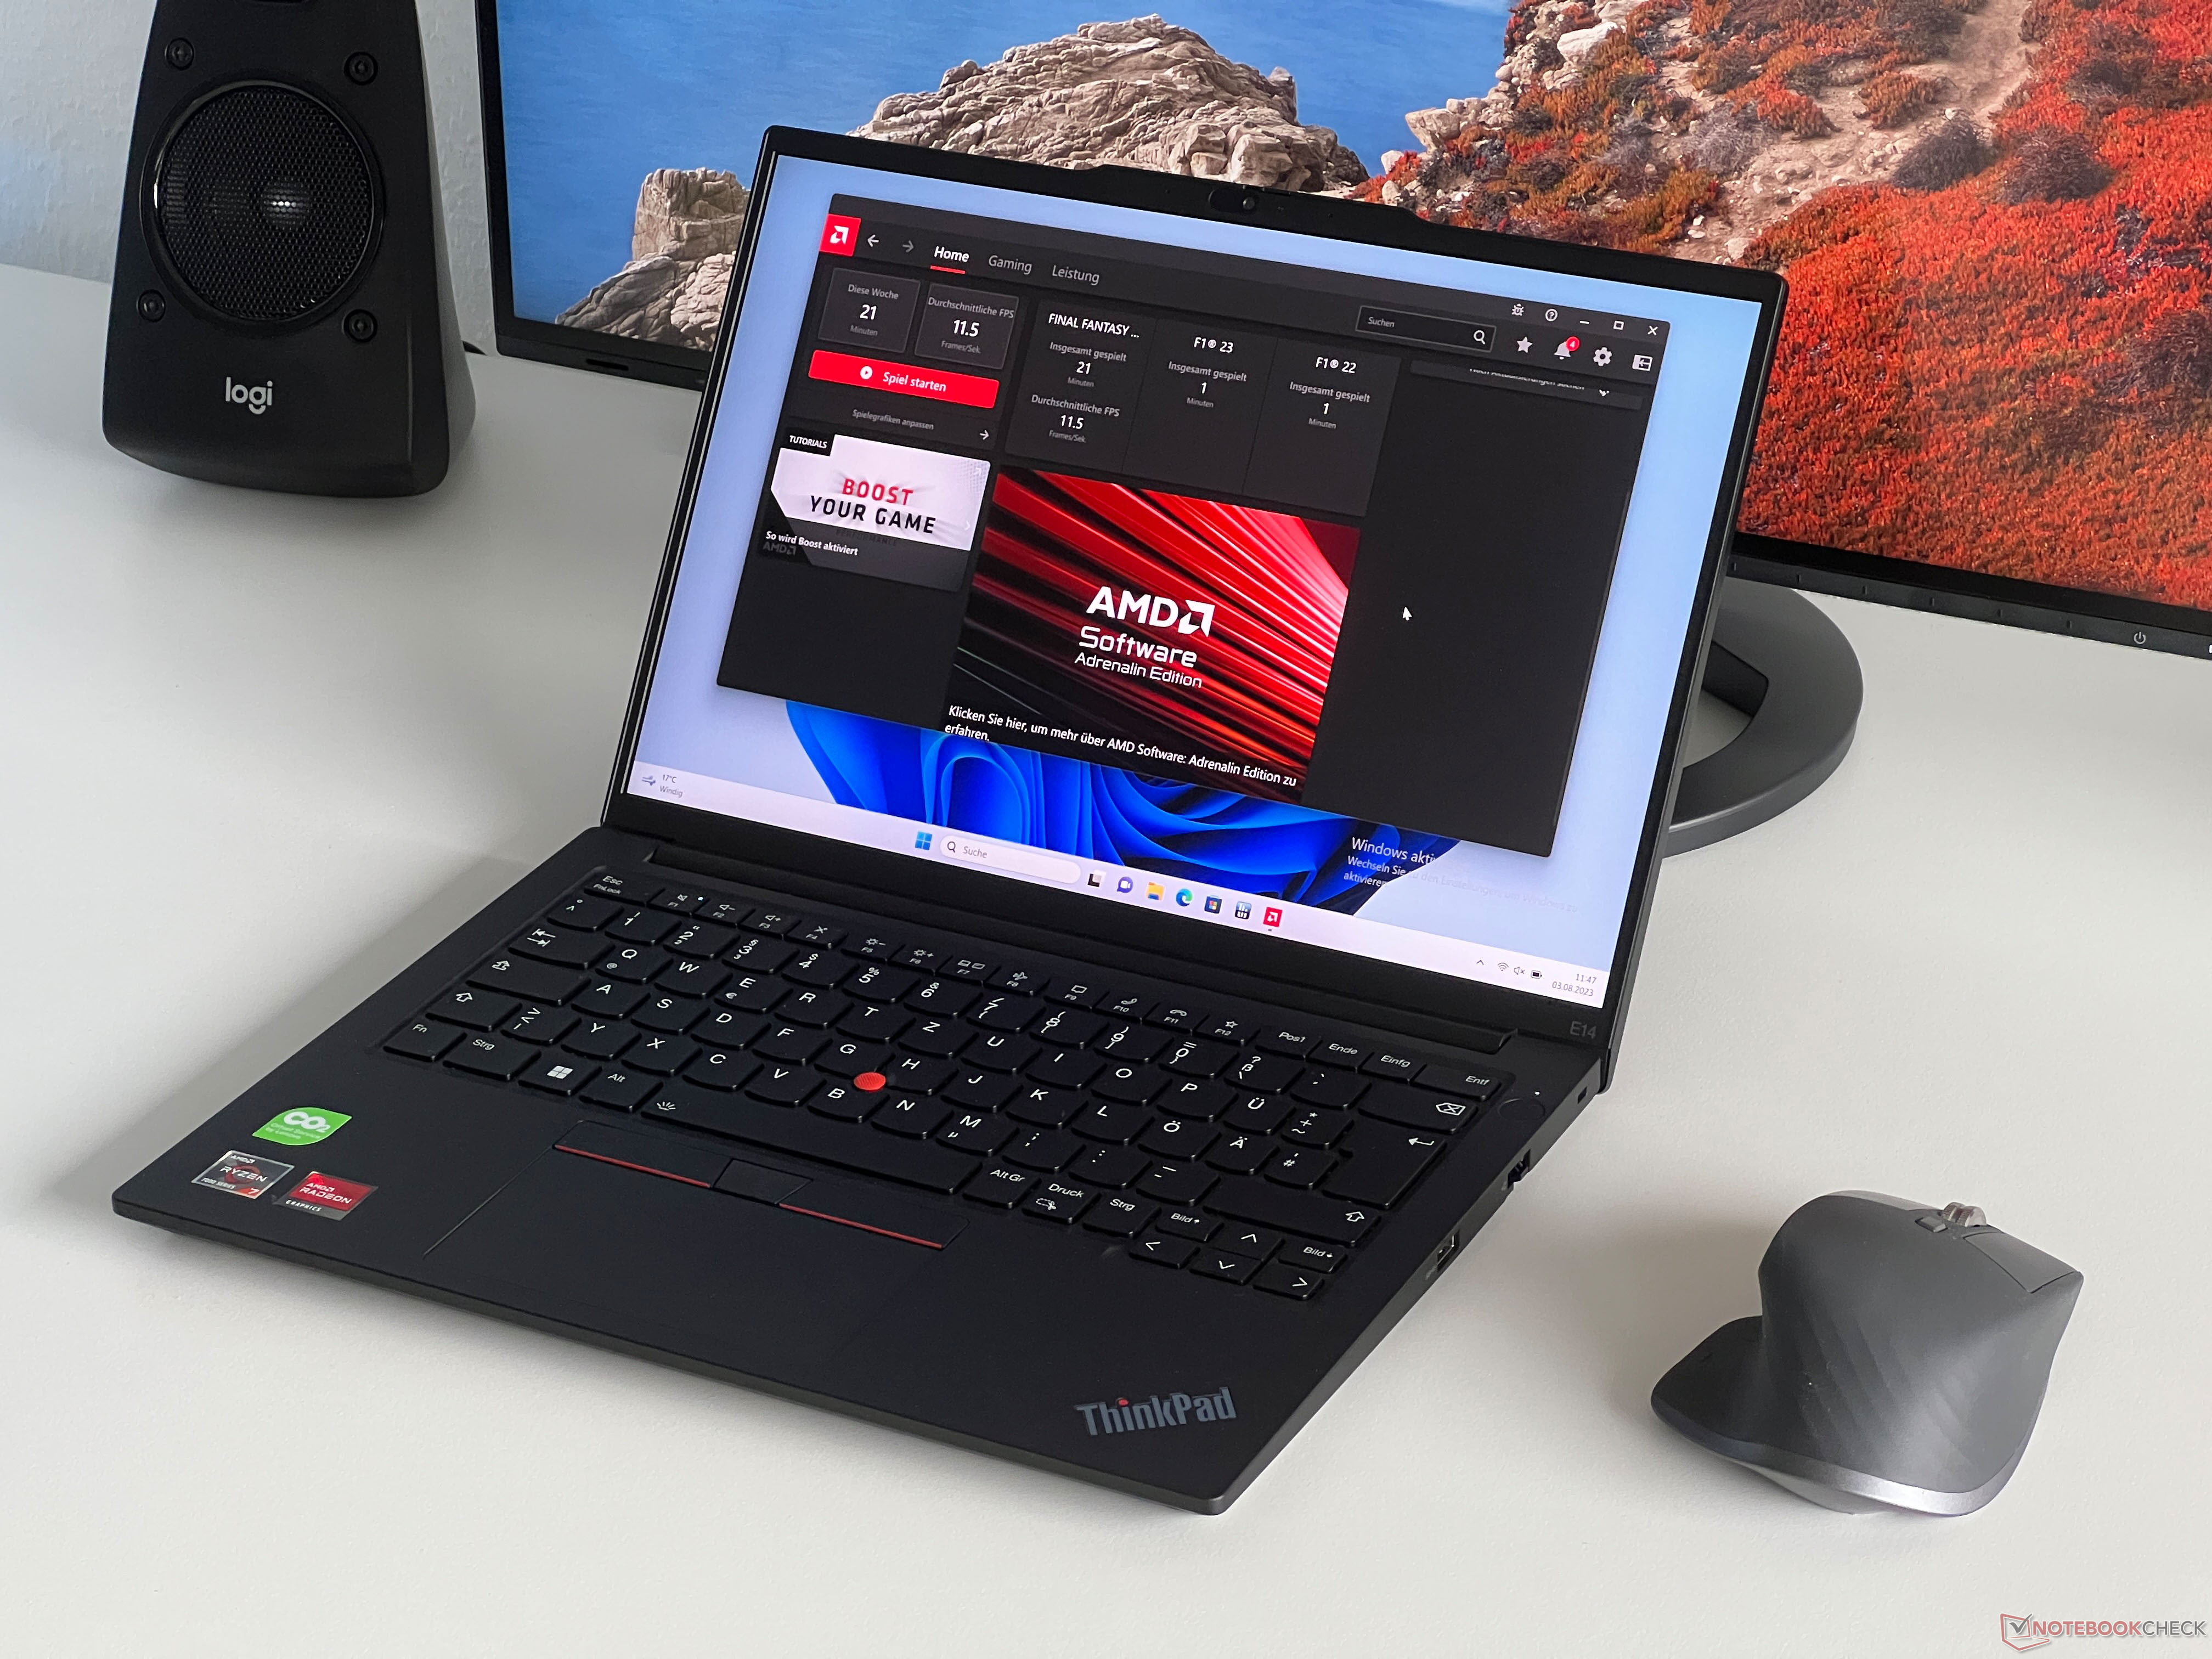 Lenovo ThinkPad E14 G5 AMD review: Affordable office laptop with